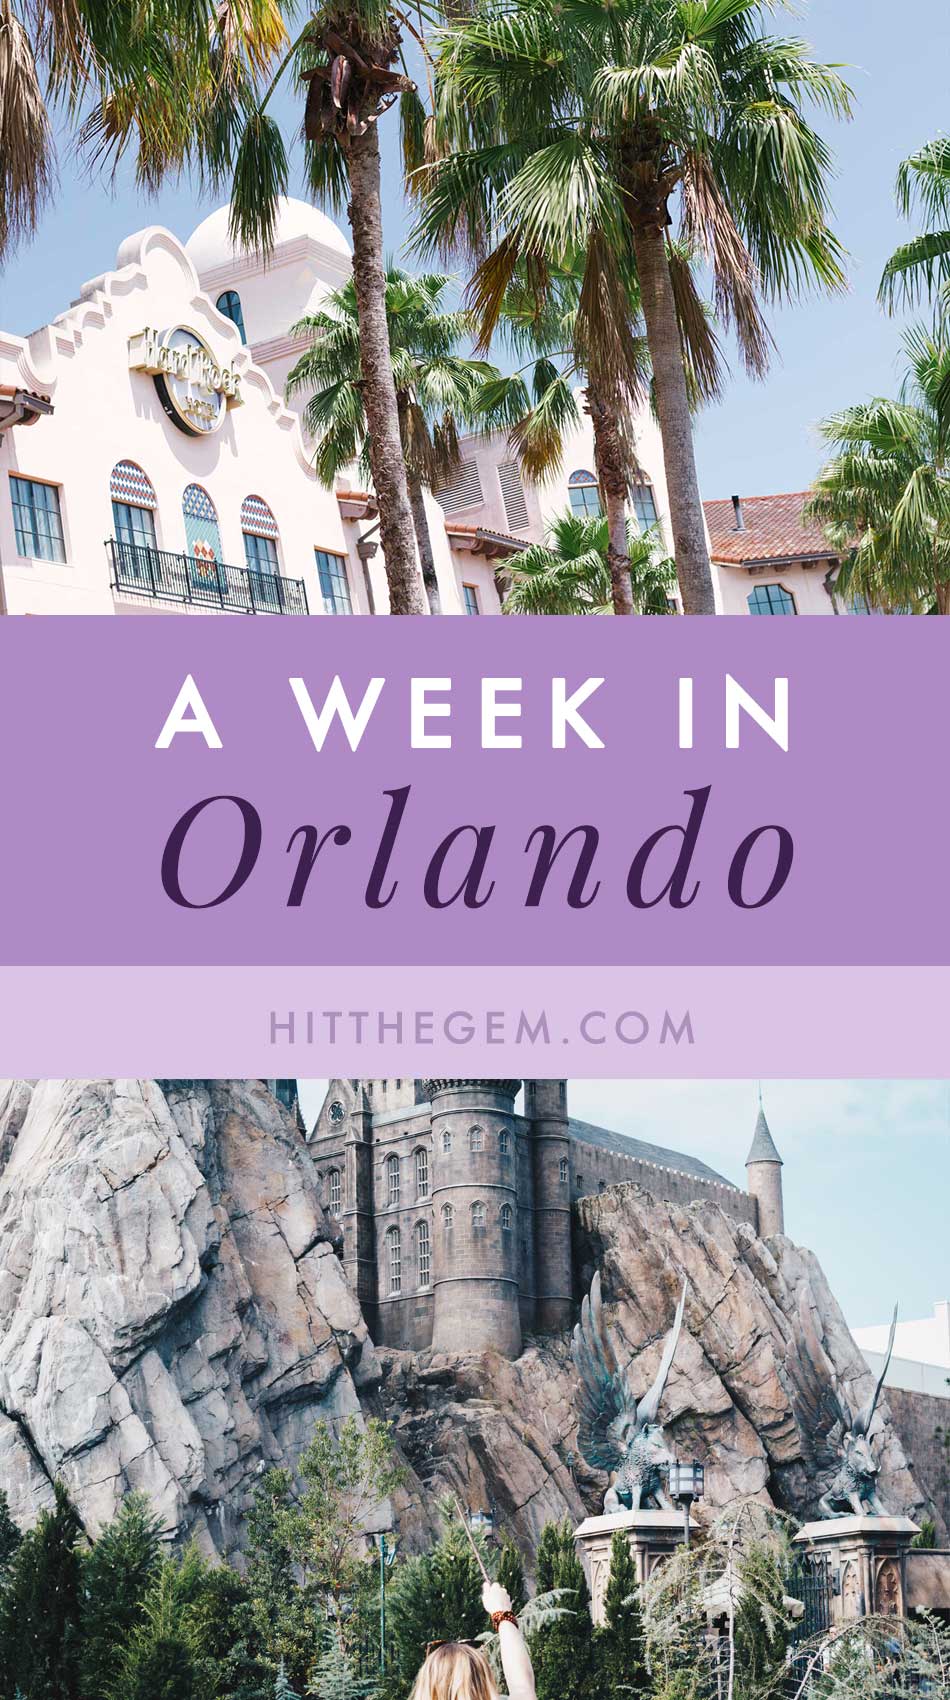 Orlando, Florida is definitely a popular vacation spot, but with so much to do, it can be difficult to plan. I thought it would be fun to share the details of my week-long Orlando vacation to offer some tips and advice about what is and possibly isn't worth visiting. One thing's for sure: you need to visit Orlando!